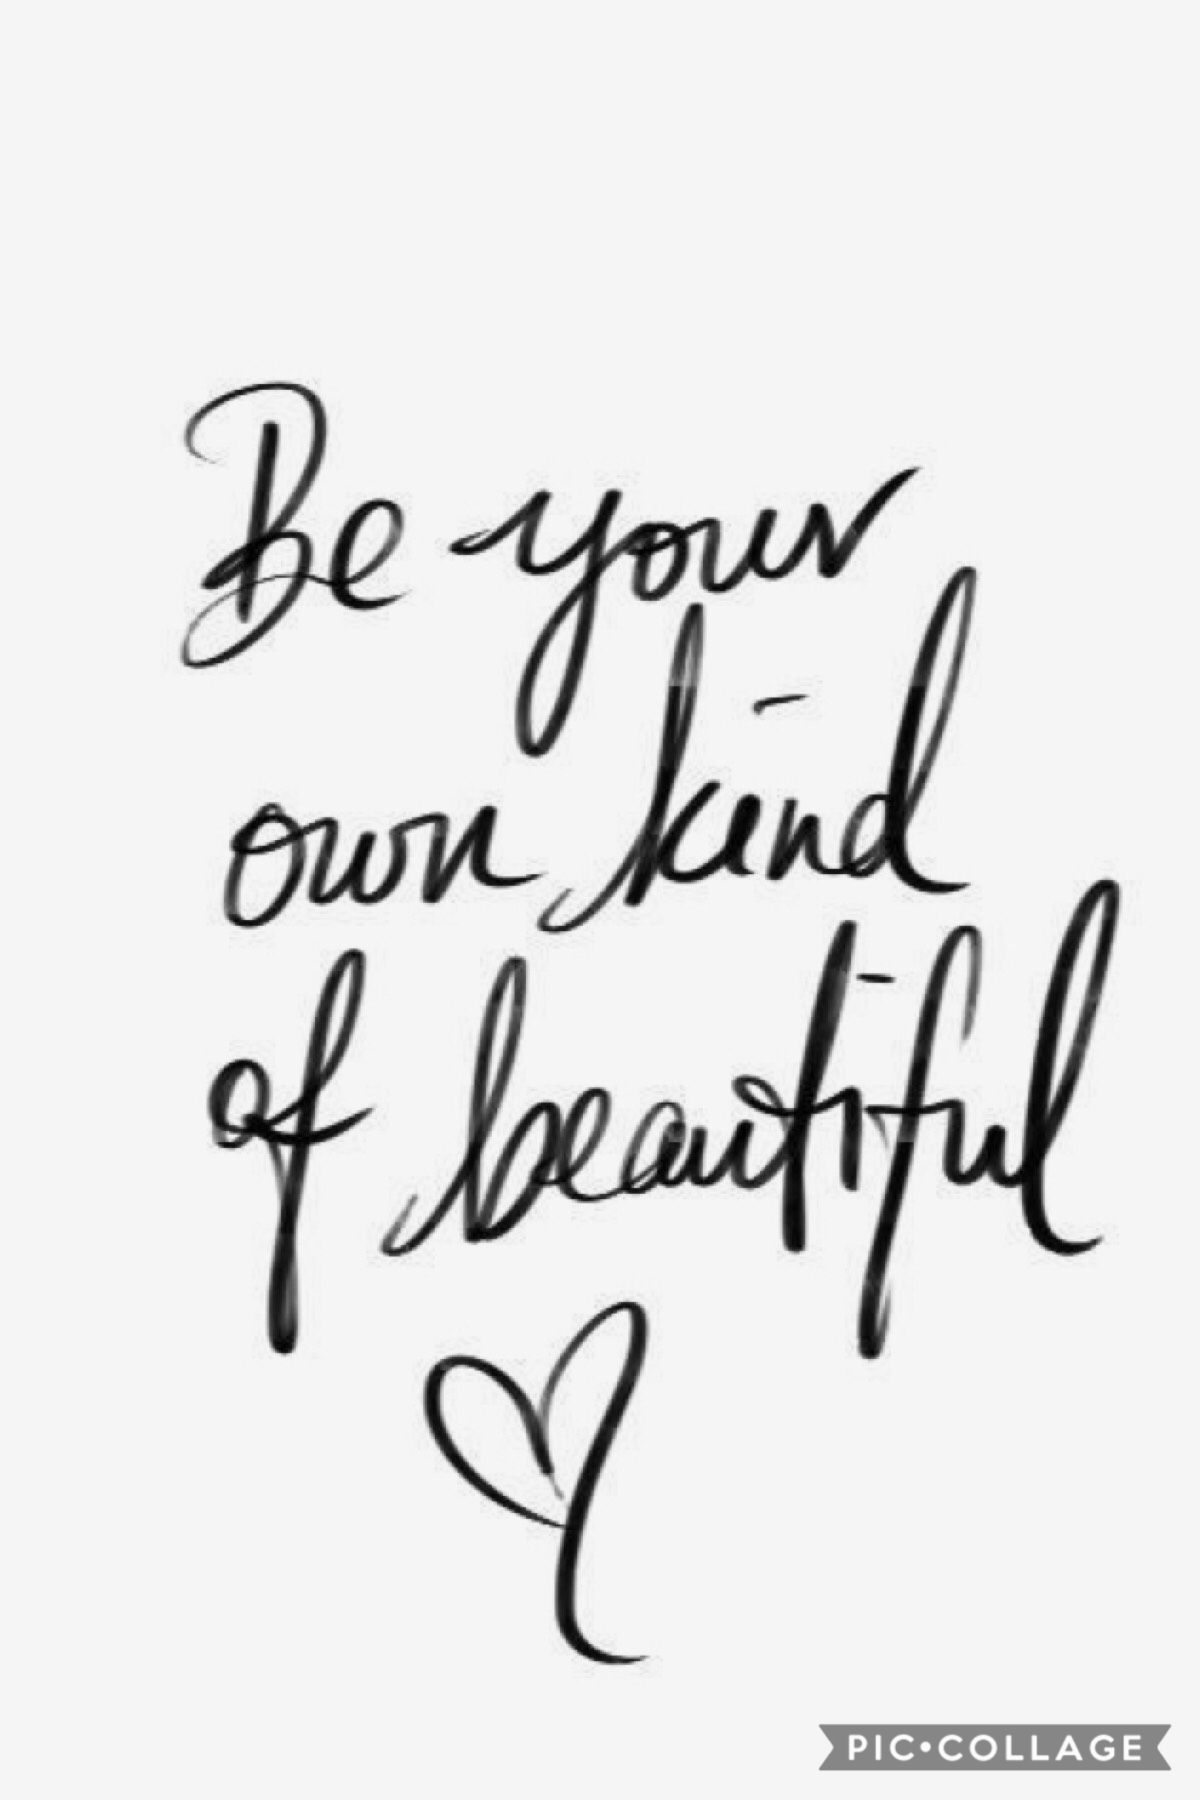 Inspirational quote #1! Enjoy and remember that you are beautiful!! ❤️❤️

Post #2